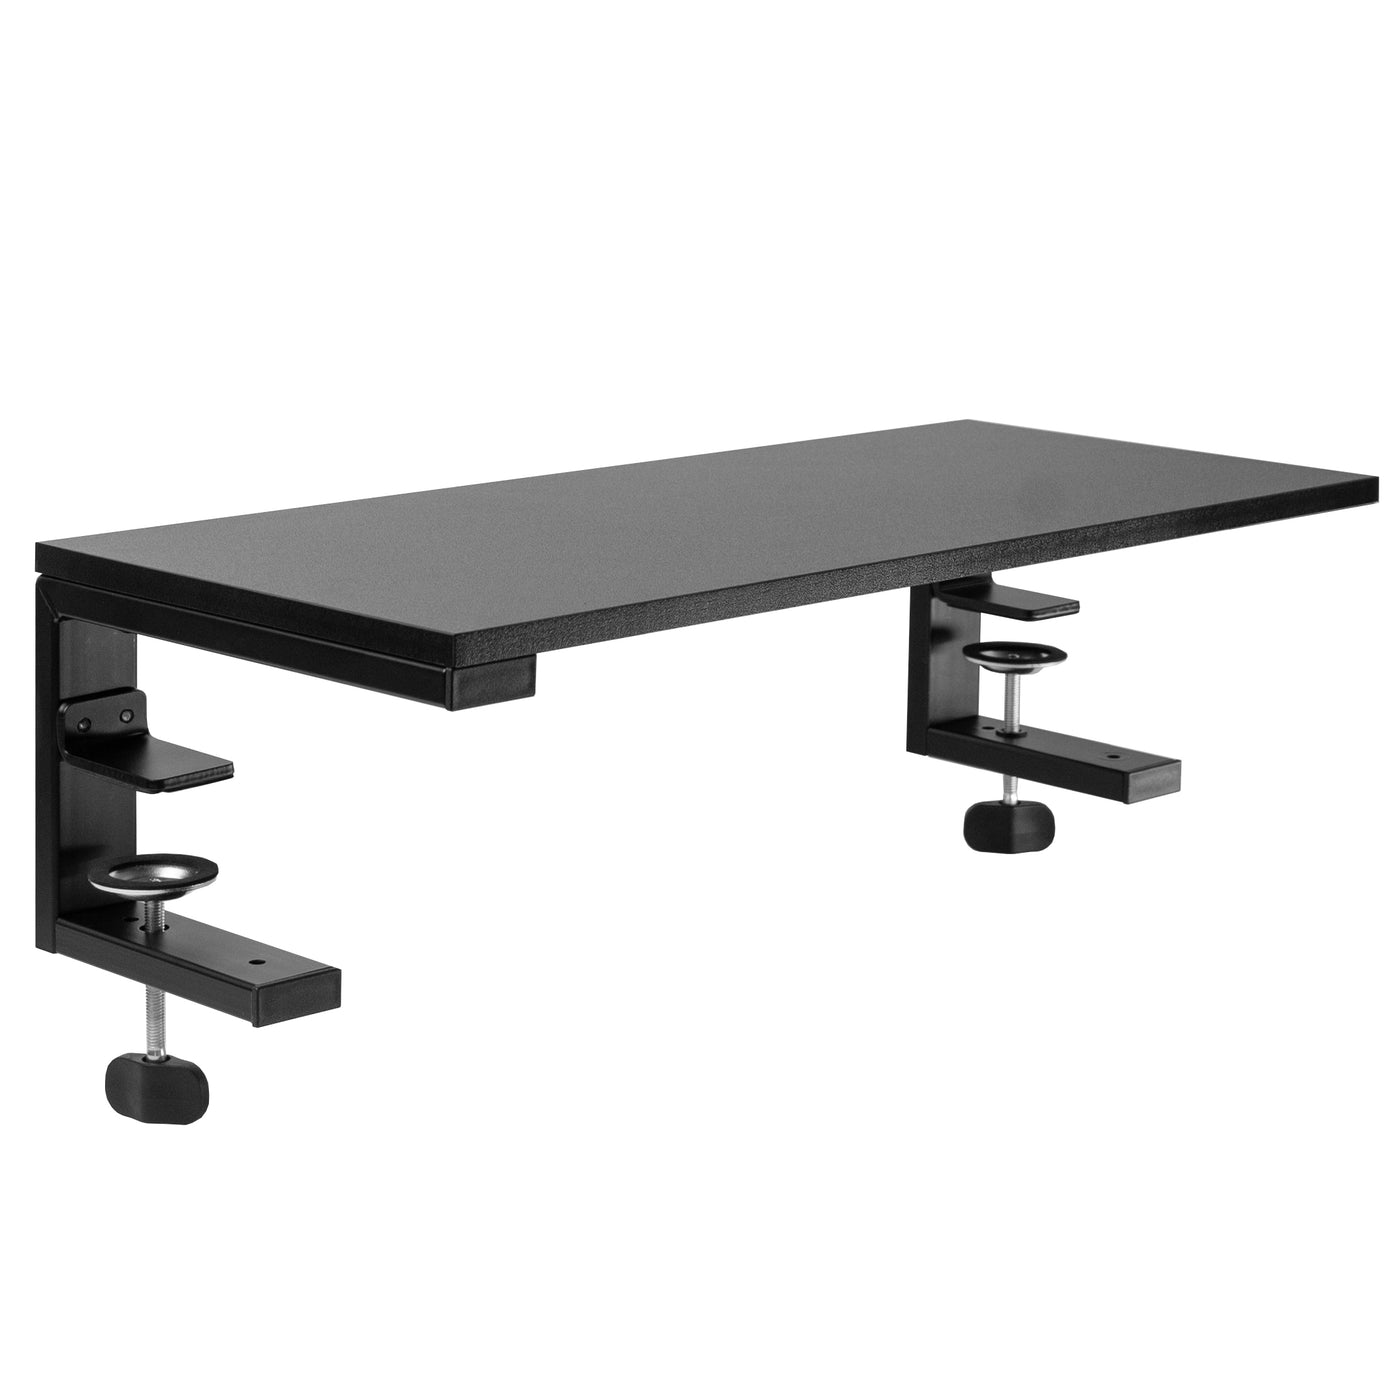 Clamp-on Desk Extension Shelf for Gaming Devices, Ergonomic Computer Monitor and Laptop Riser, Printer Stand, Versatile with Freestanding Feet